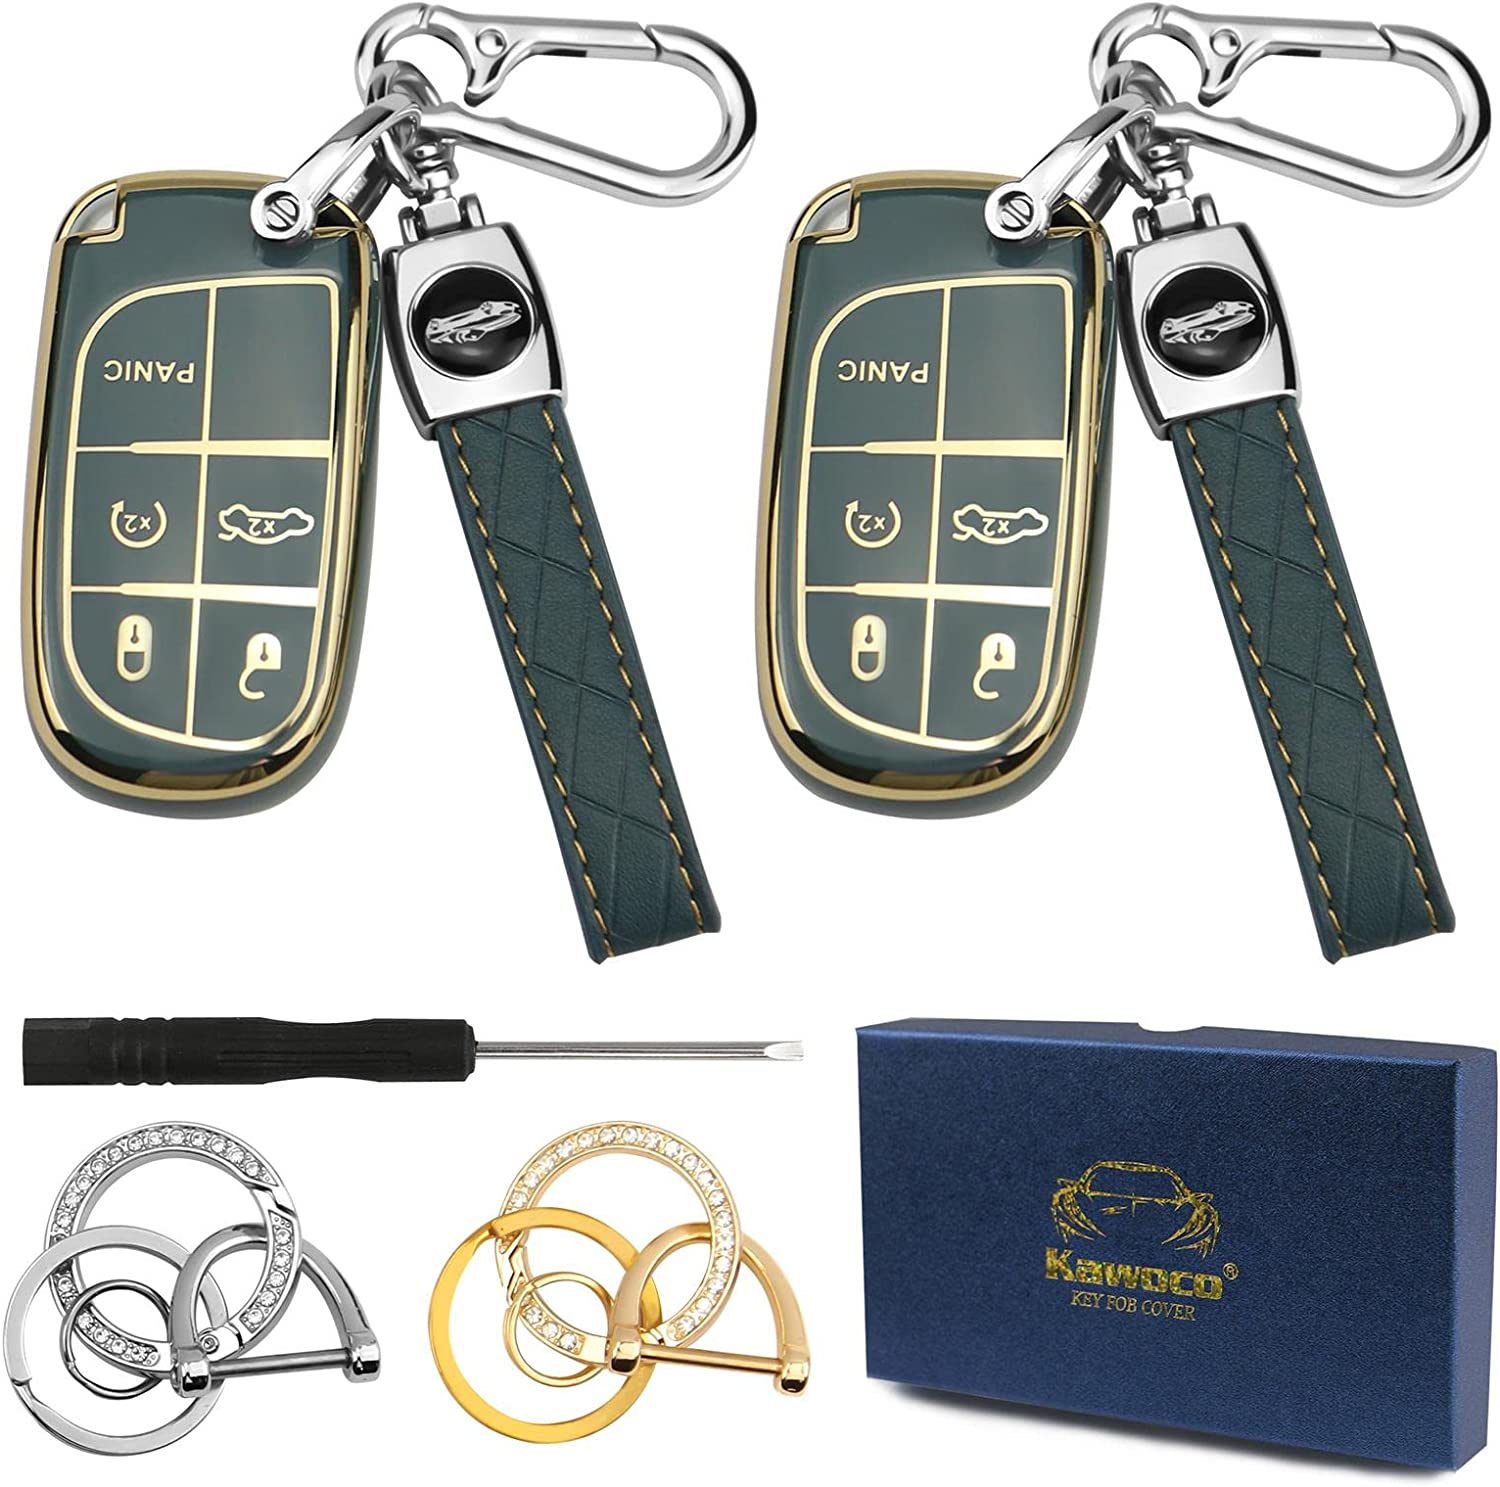 2Set Gift Package for jeep key fob cover with for jeep keychain, Compatible with jeep grand cherokee key fob cover, Blue - Delicate Leather